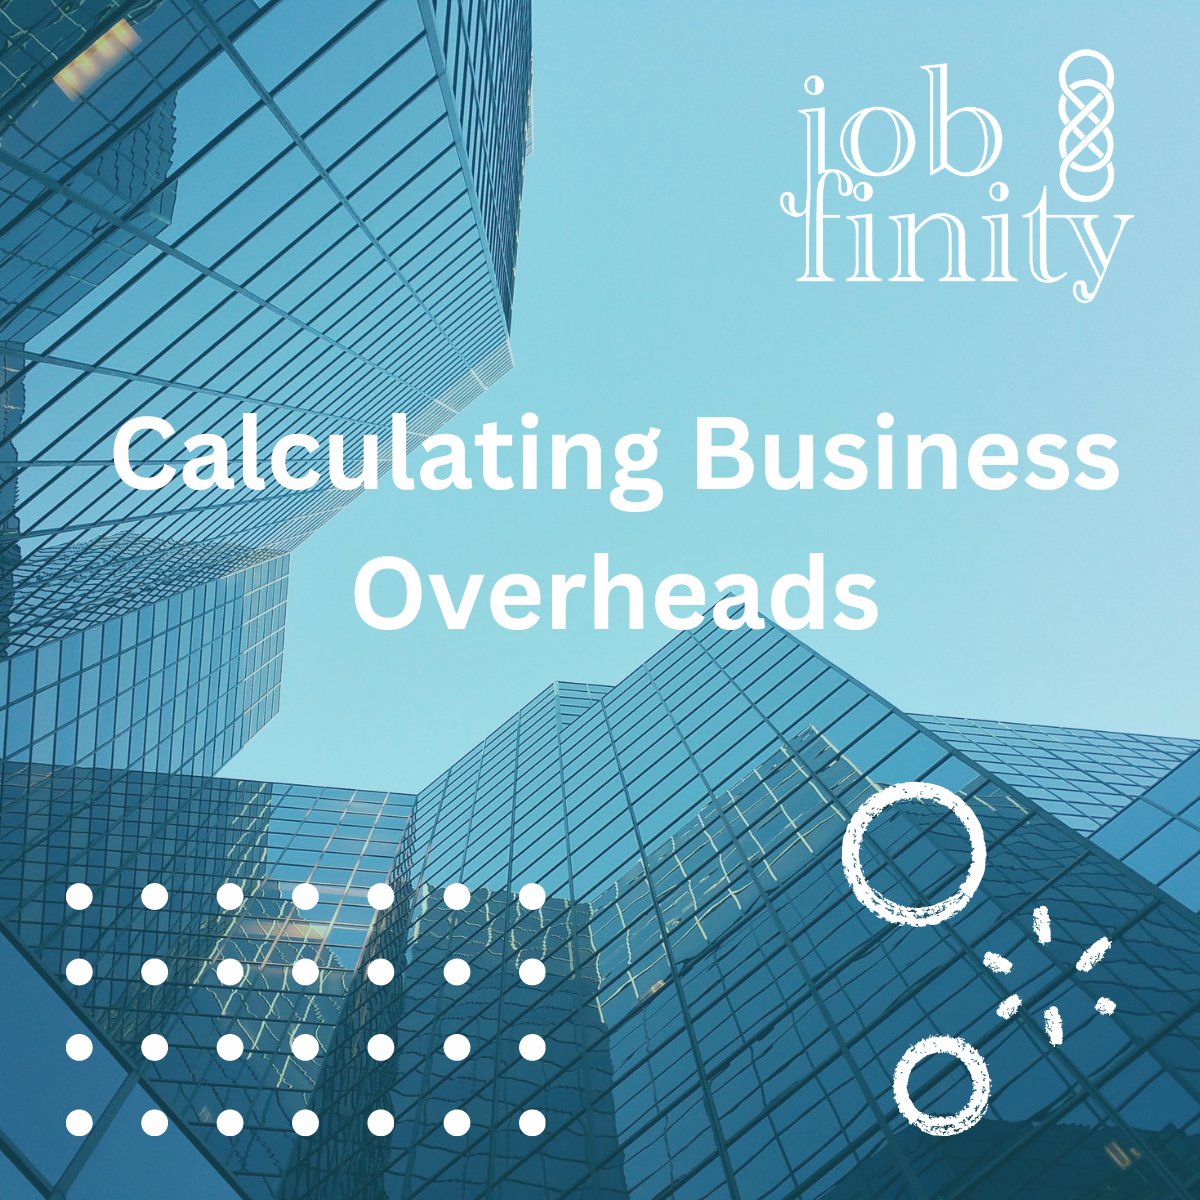 📊 Simplify your financial management with Jobfinity! Allow us to tackle the complex task of calculating your business overheads, so you can dedicate your energy to expanding your enterprise. Trust in our expertise for precise overhead analysis. 

#BusinessOverheads #Jobfinity